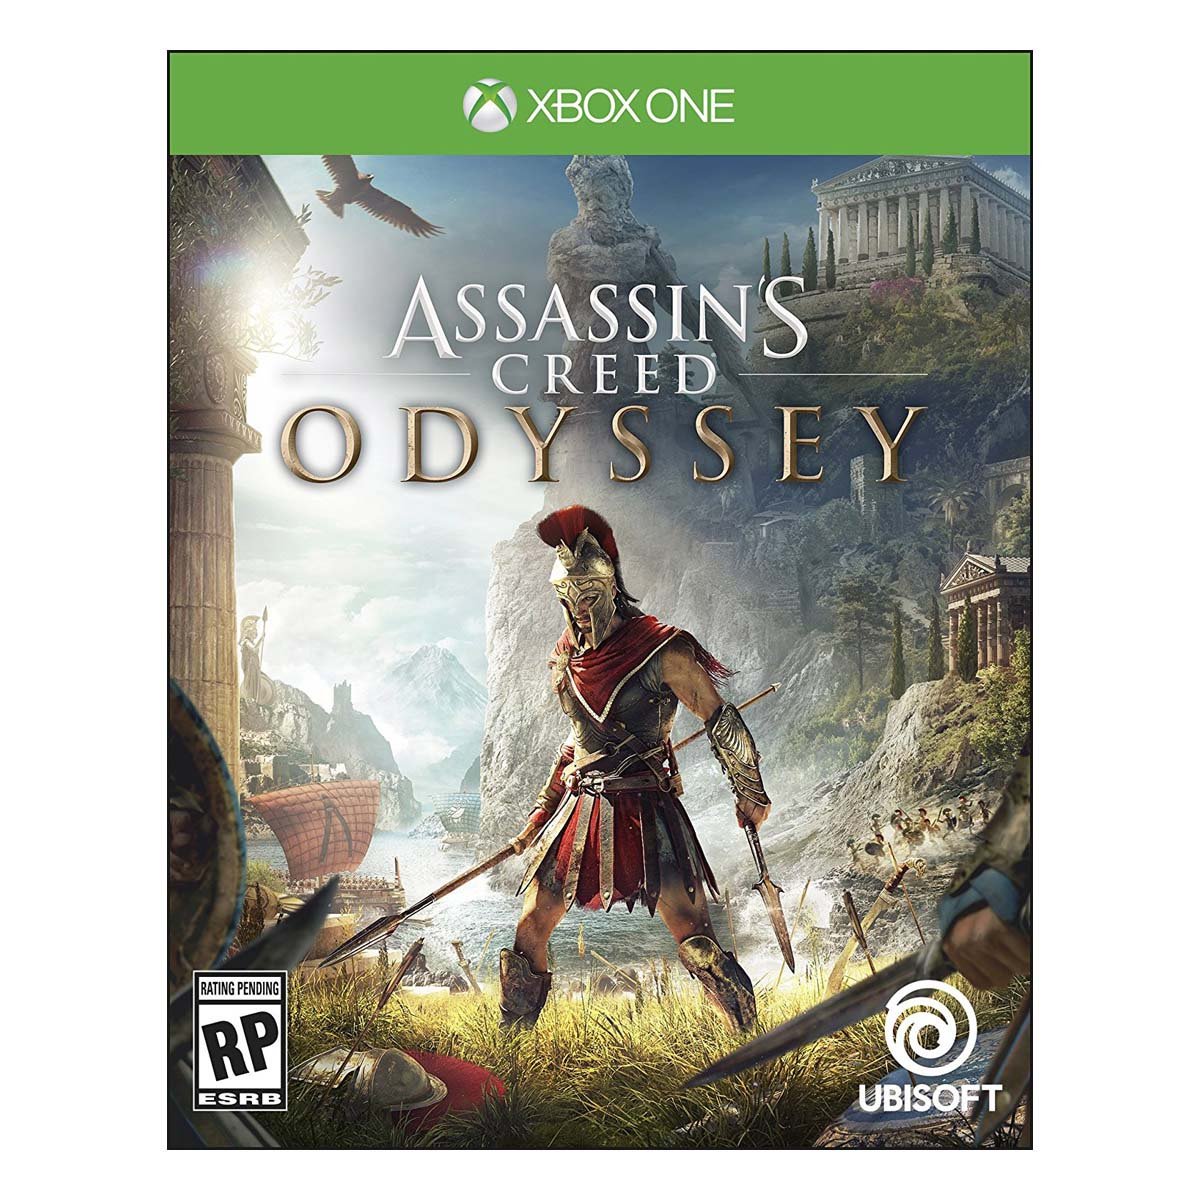 Xbox One Assassin's Creed Odyssey Limited